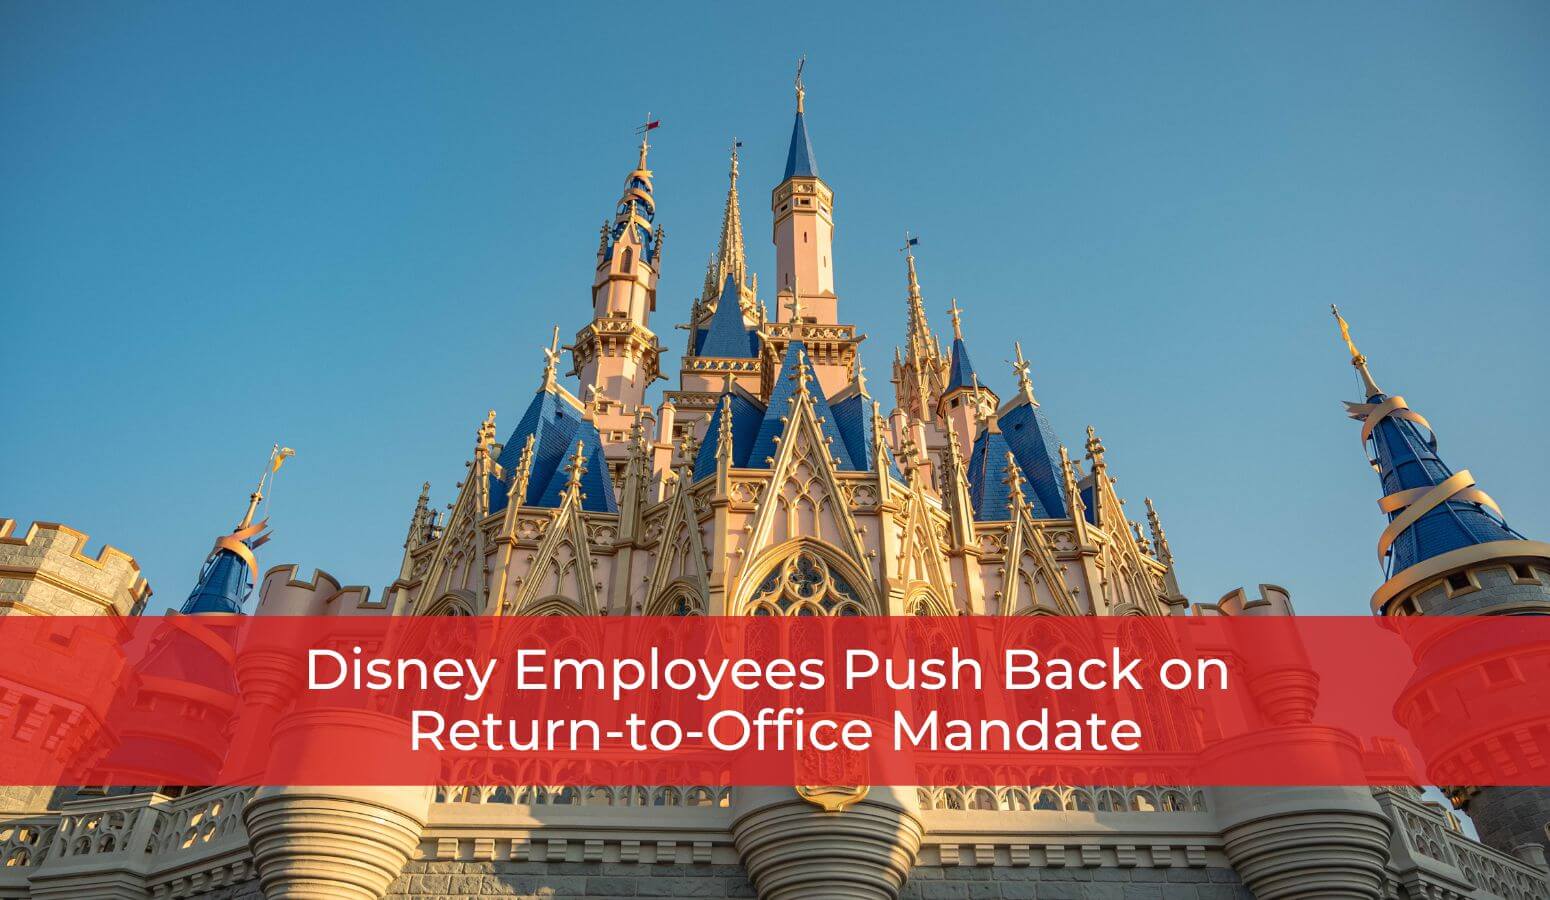 Featured image for “Disney Employees Push Back on Return-to-Office Mandate”